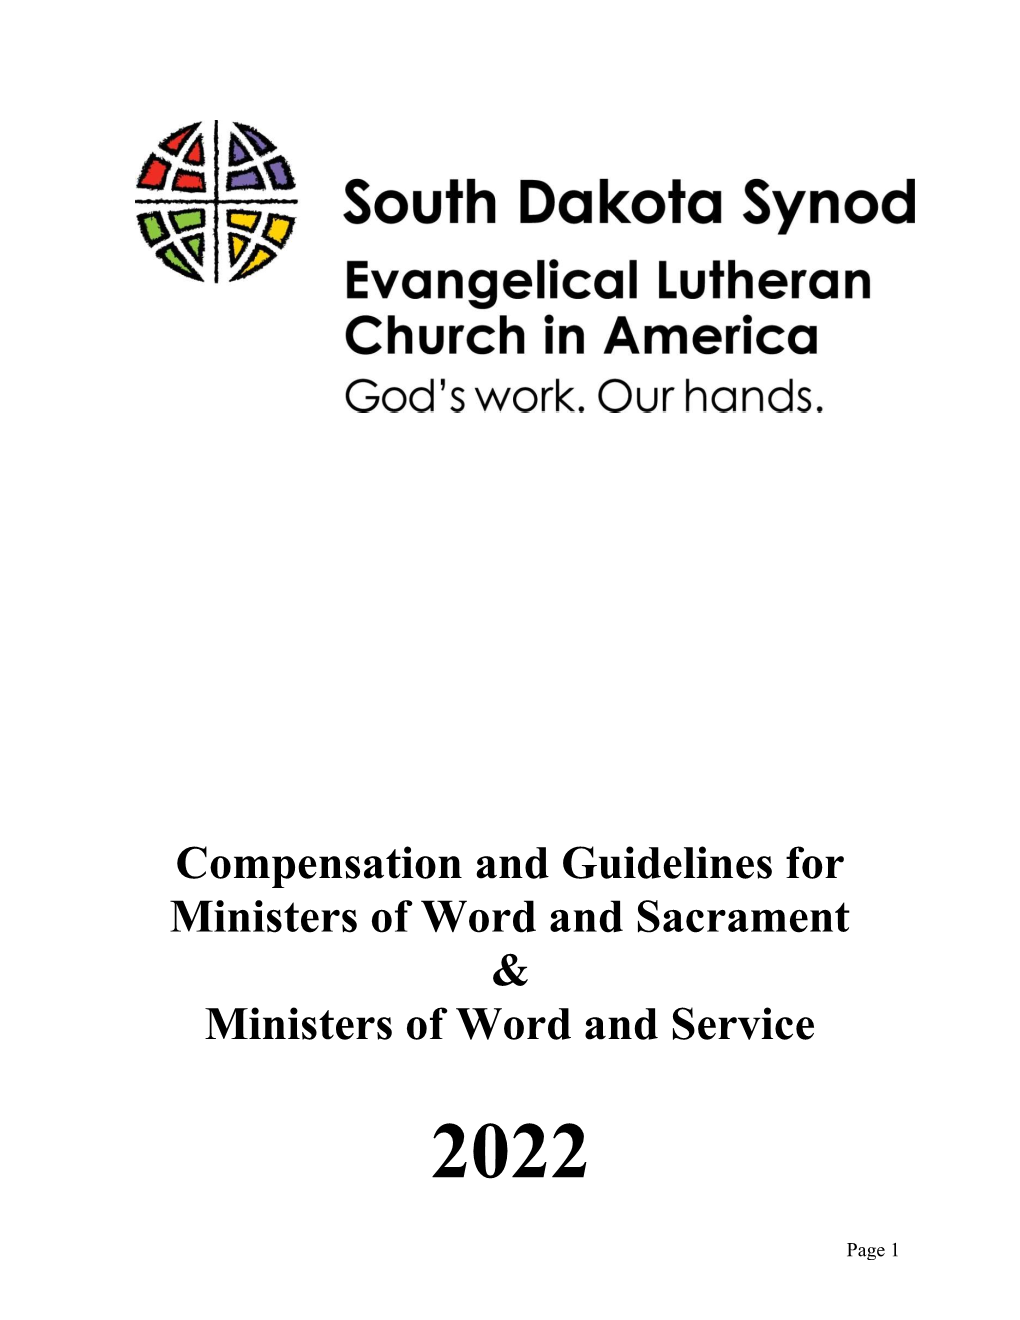 2022 Compensation and Guidelines for Rostered Ministers